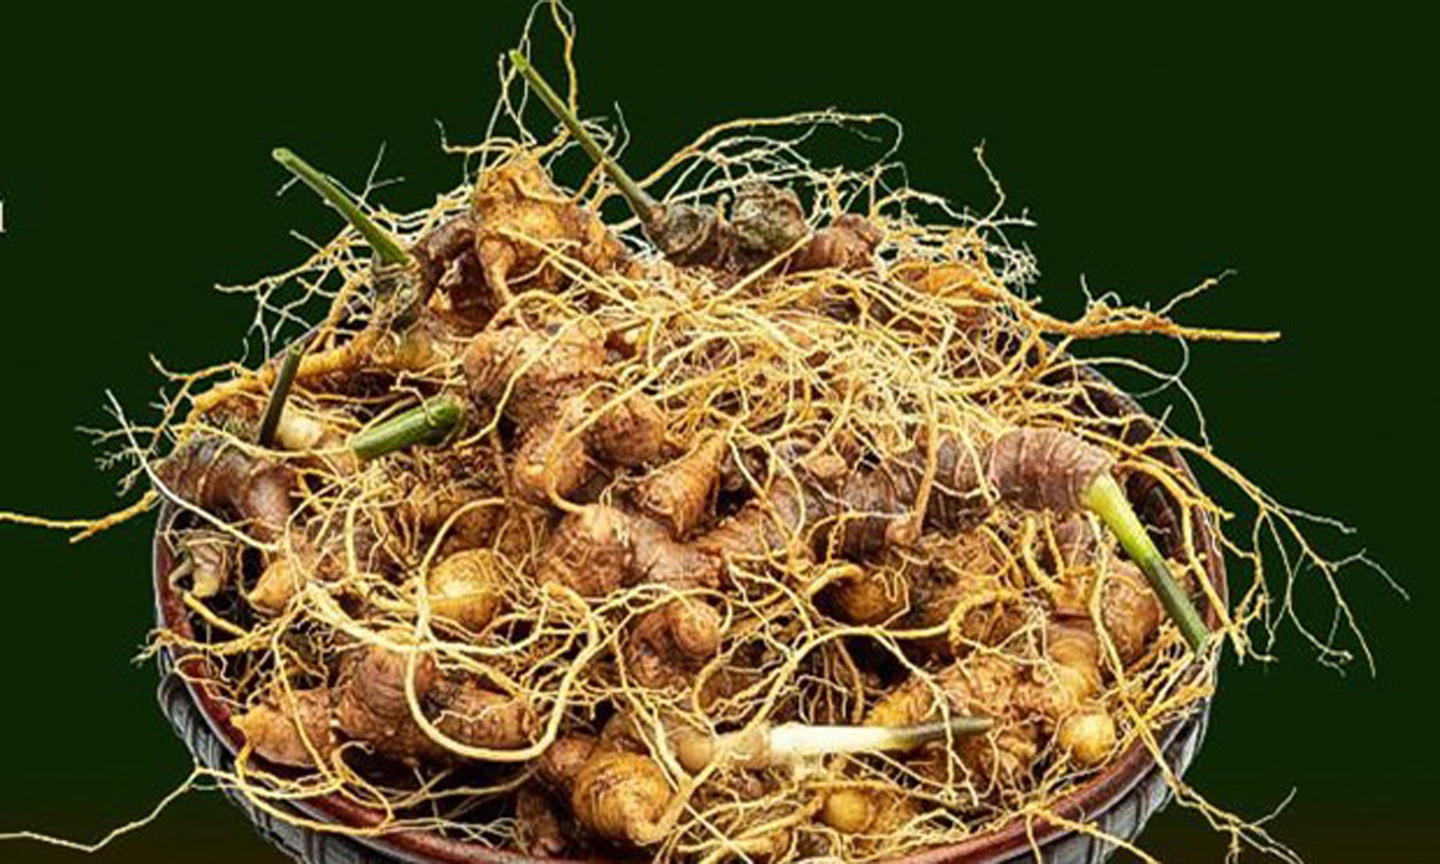 and product with an aim to becoming a major ginseng producer of the world by 2045.